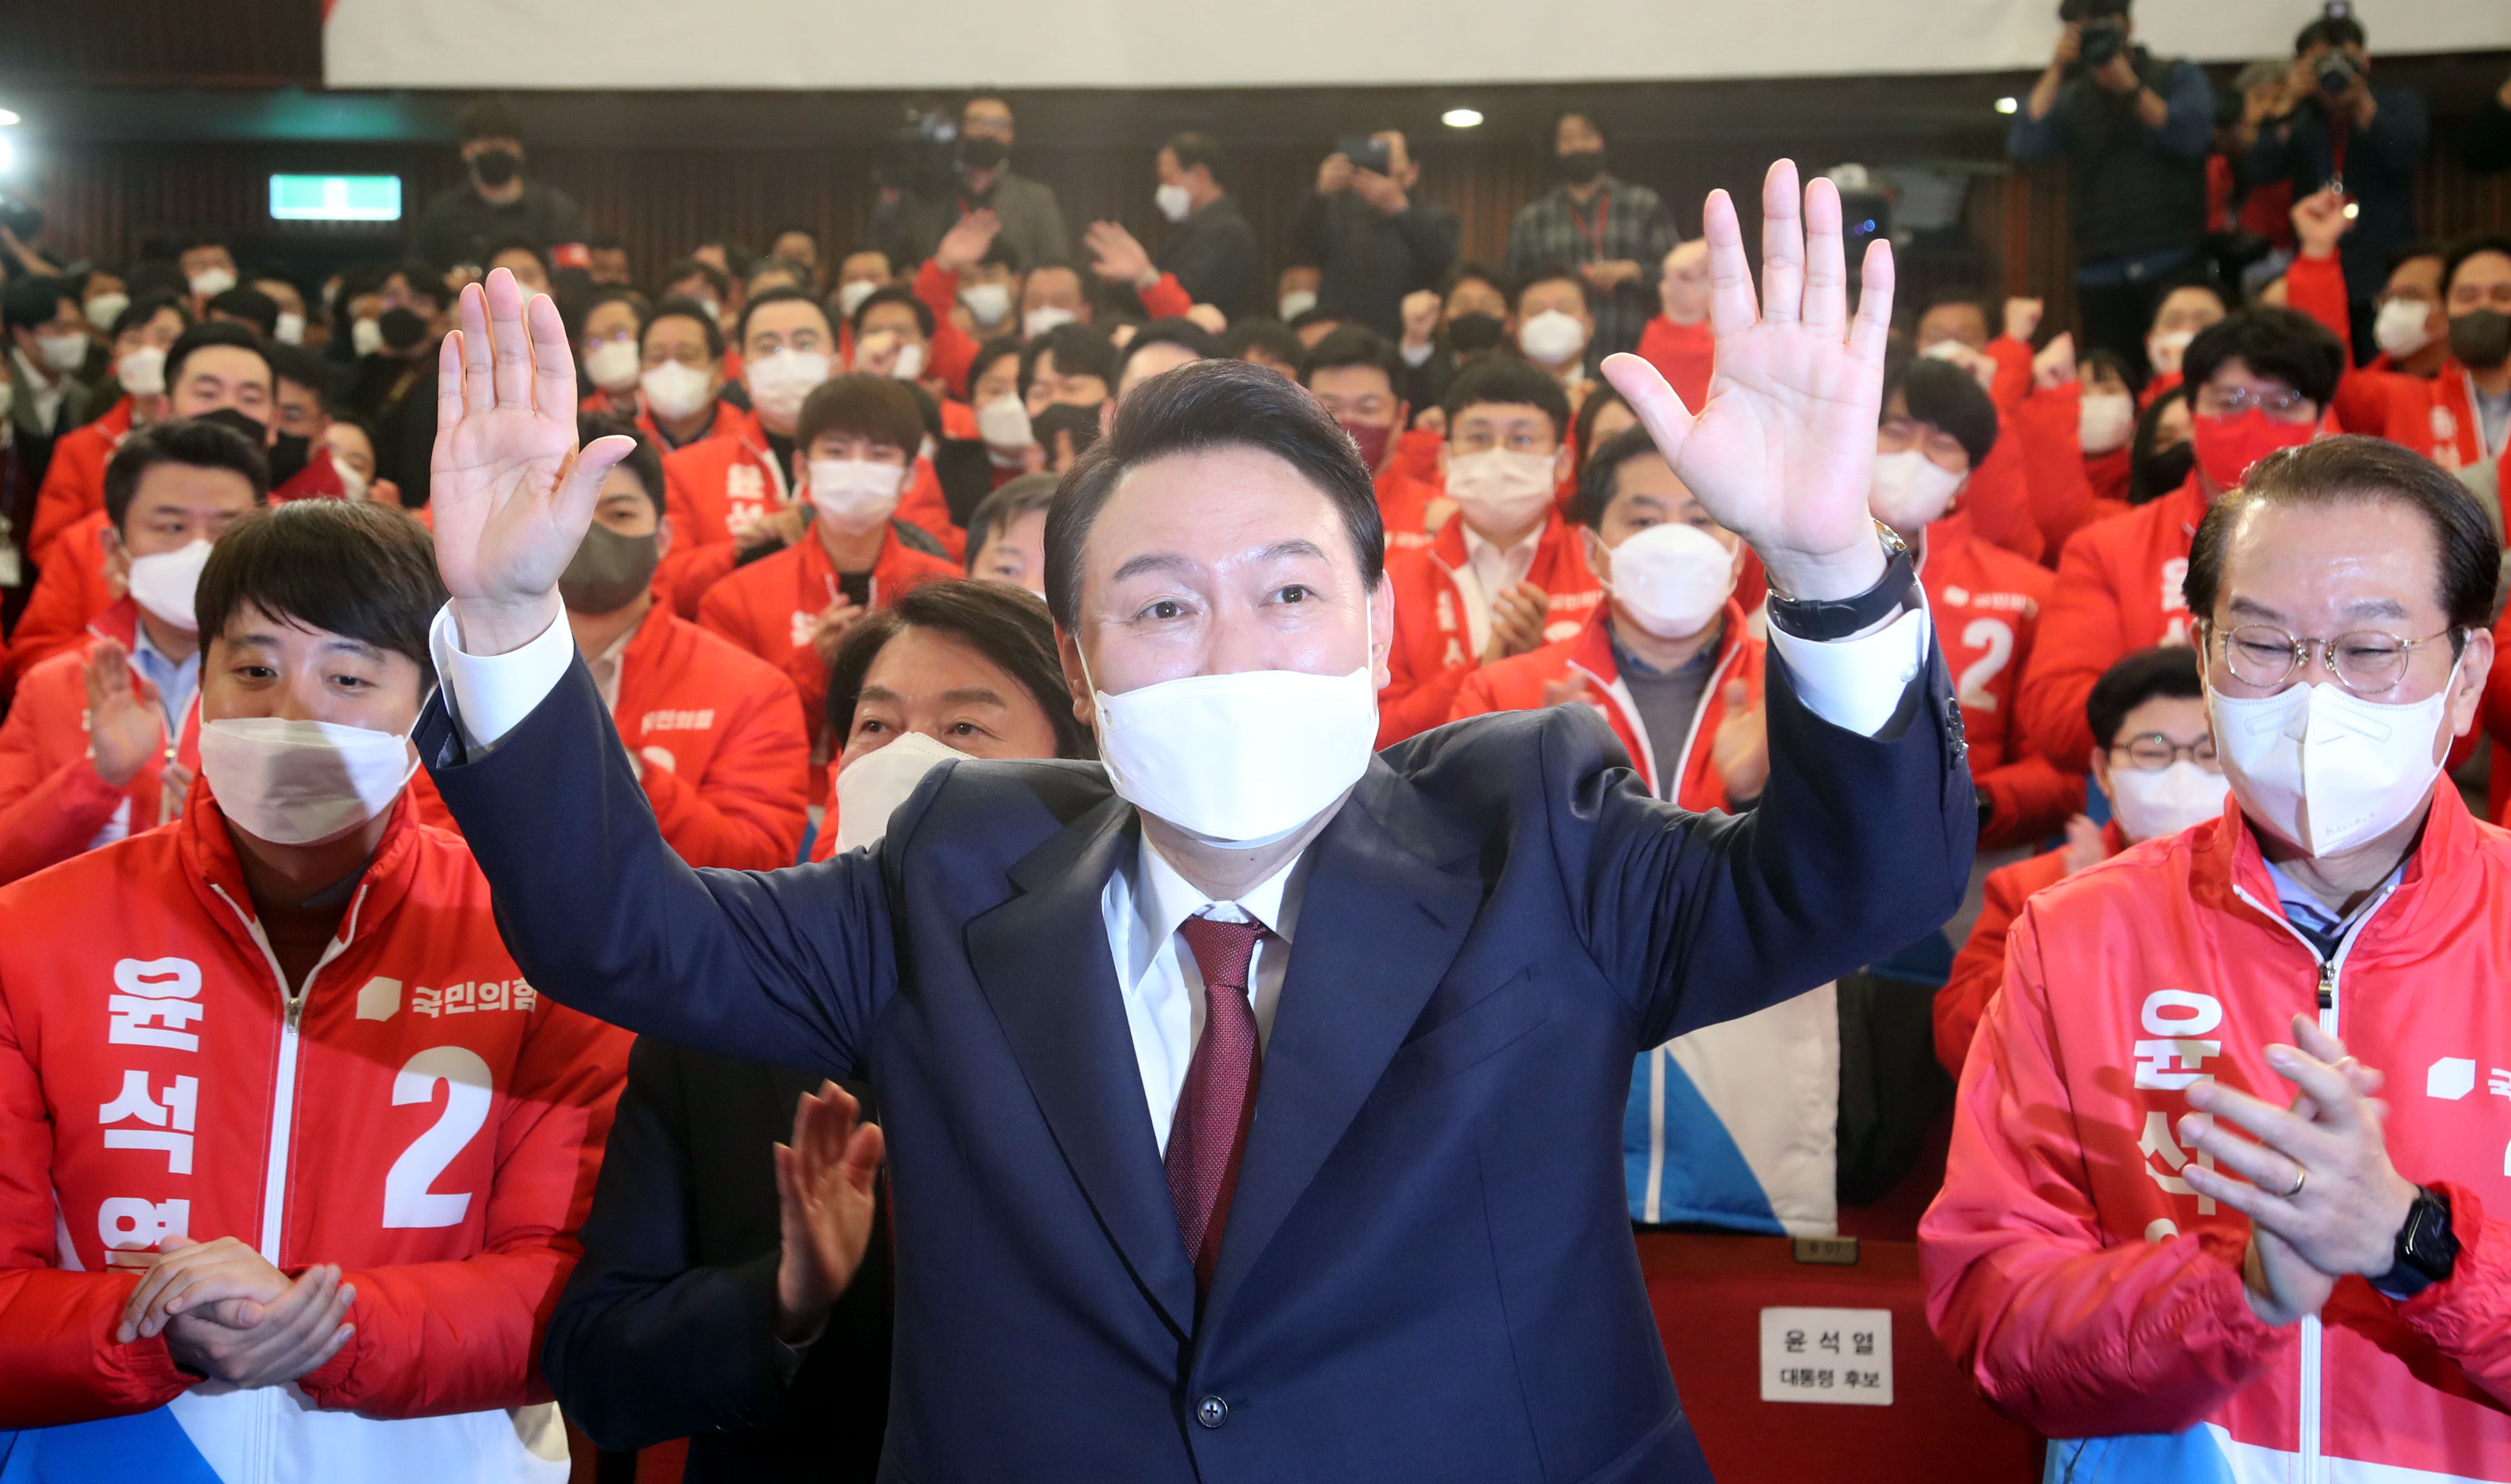 South Korean president-elect Yoon Suk-yeol is taking a harder stance on China. Photo: Xinhua